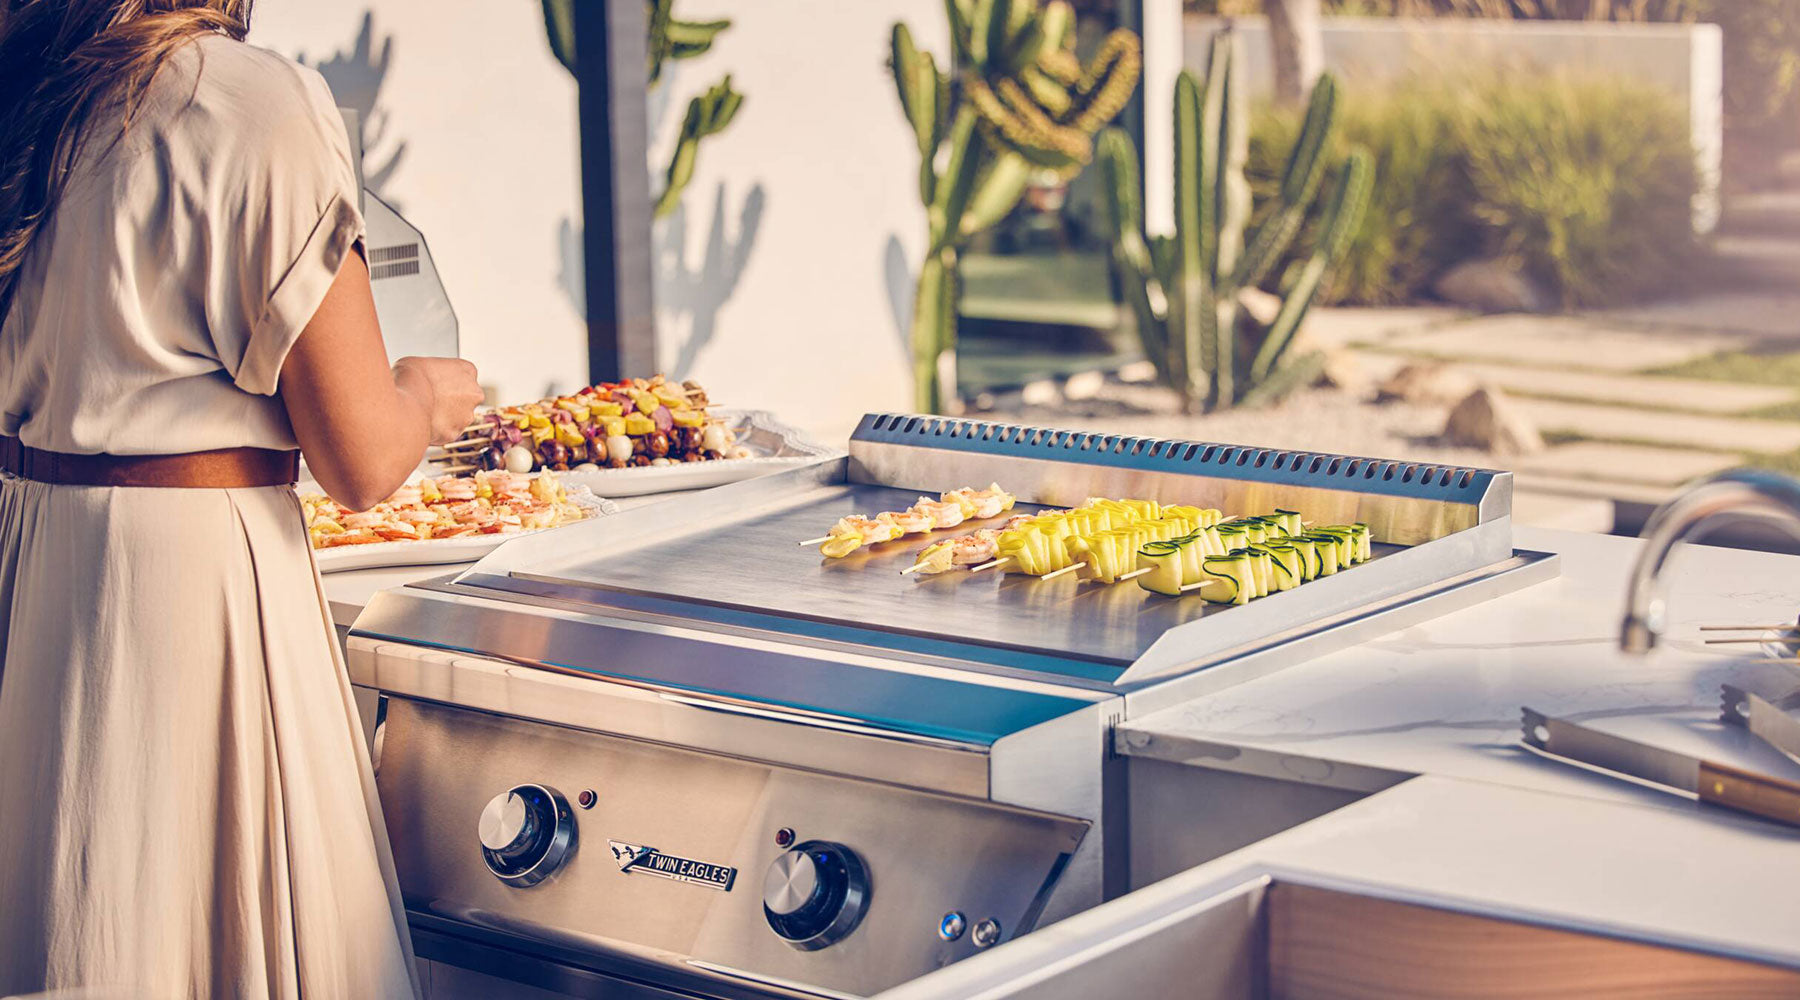 Charcoal vs. Gas Grills: Which Is Better for Your BBQ?